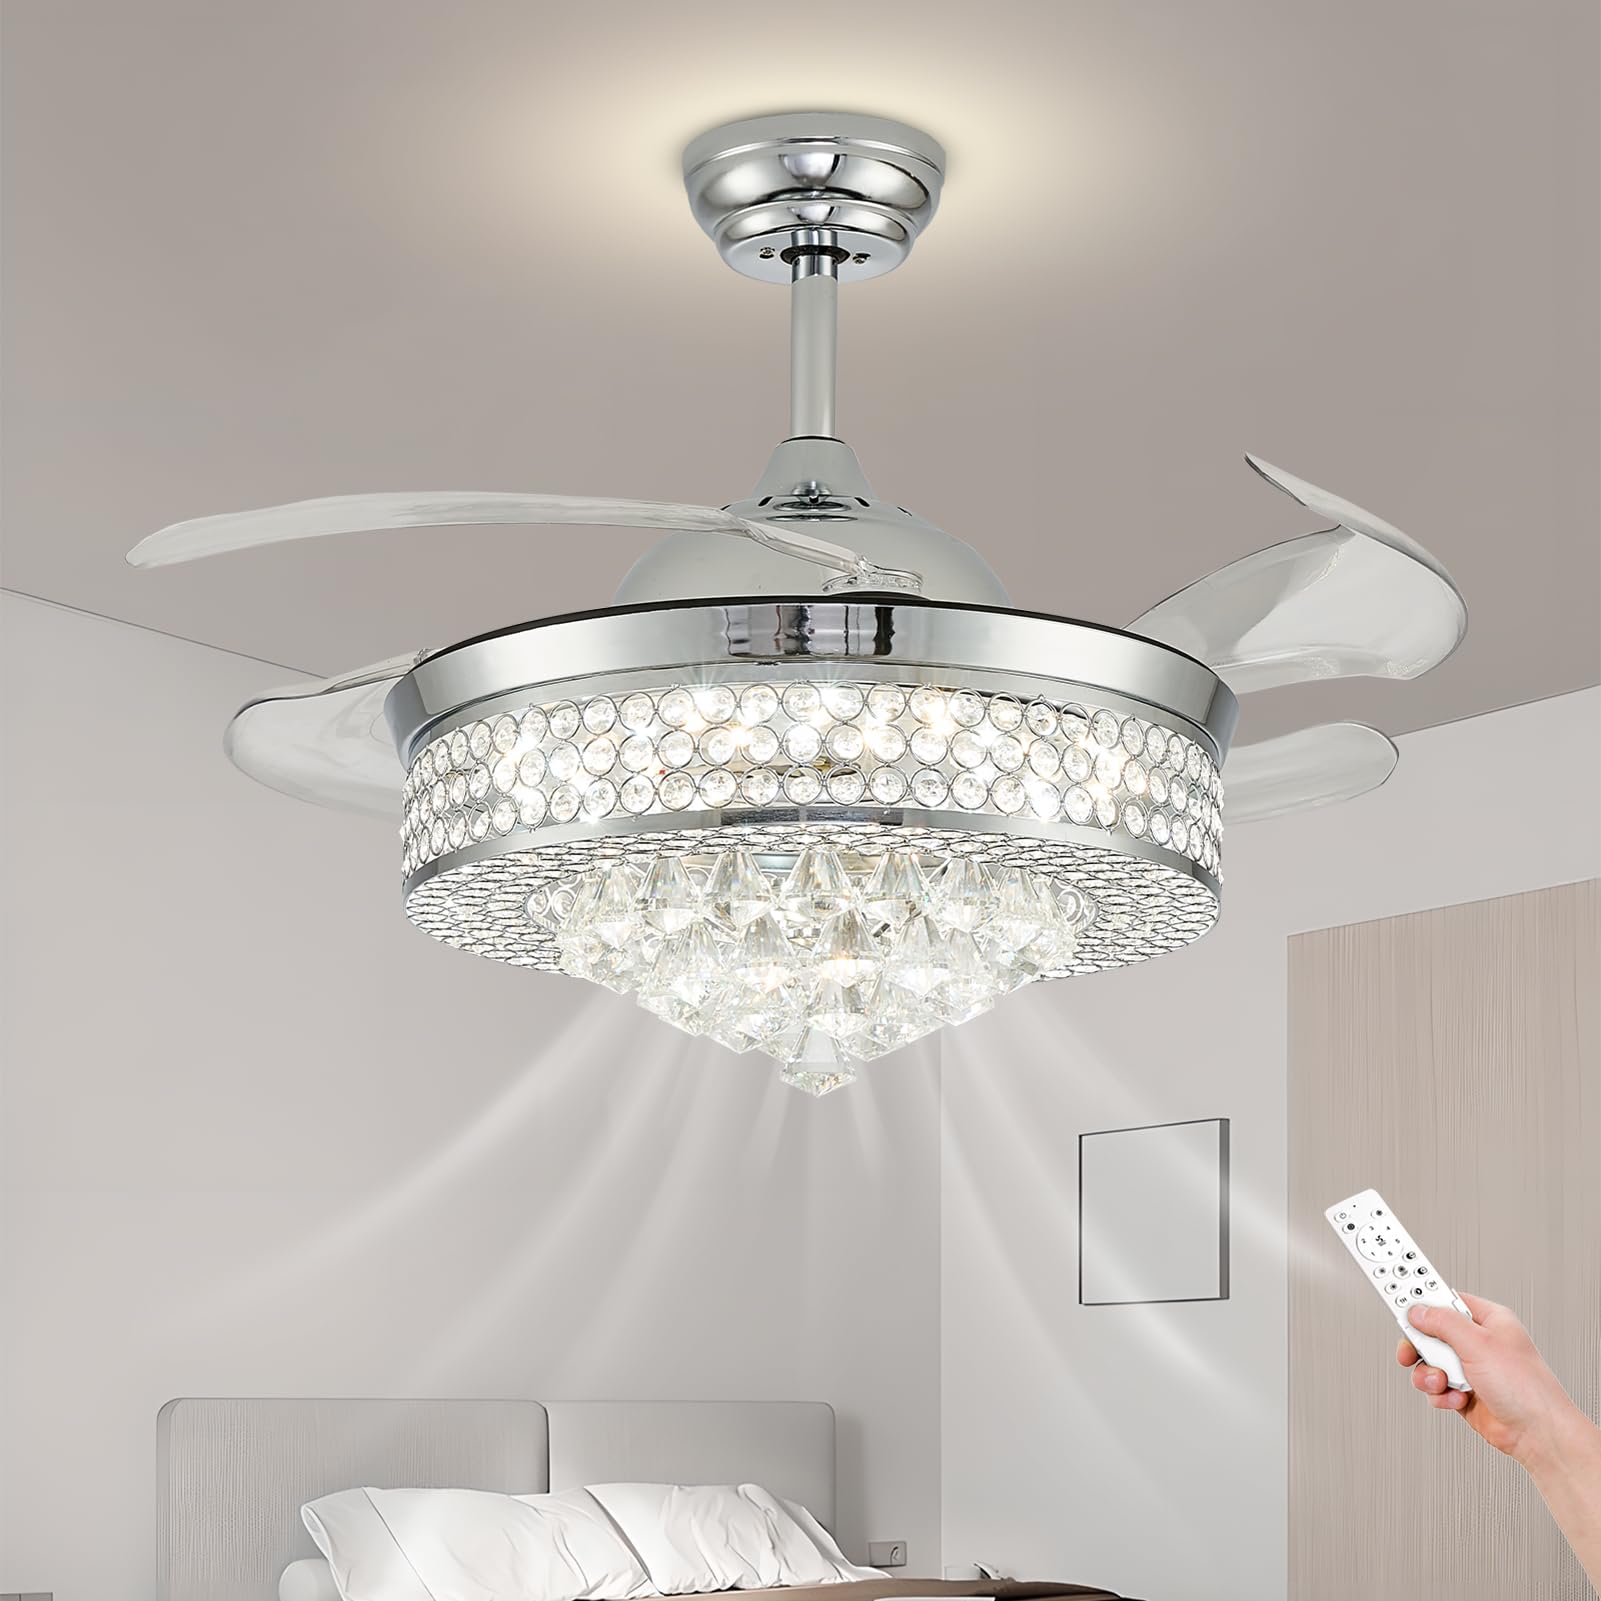 Finktonglan 42'' Dimmable Crystal Fandeliers Chandelier Fans with Remote, LED Ceiling Fan with Lights for Bedroom Dining Room Retractable Blade 6 Speed 3 Color Change, Chrome